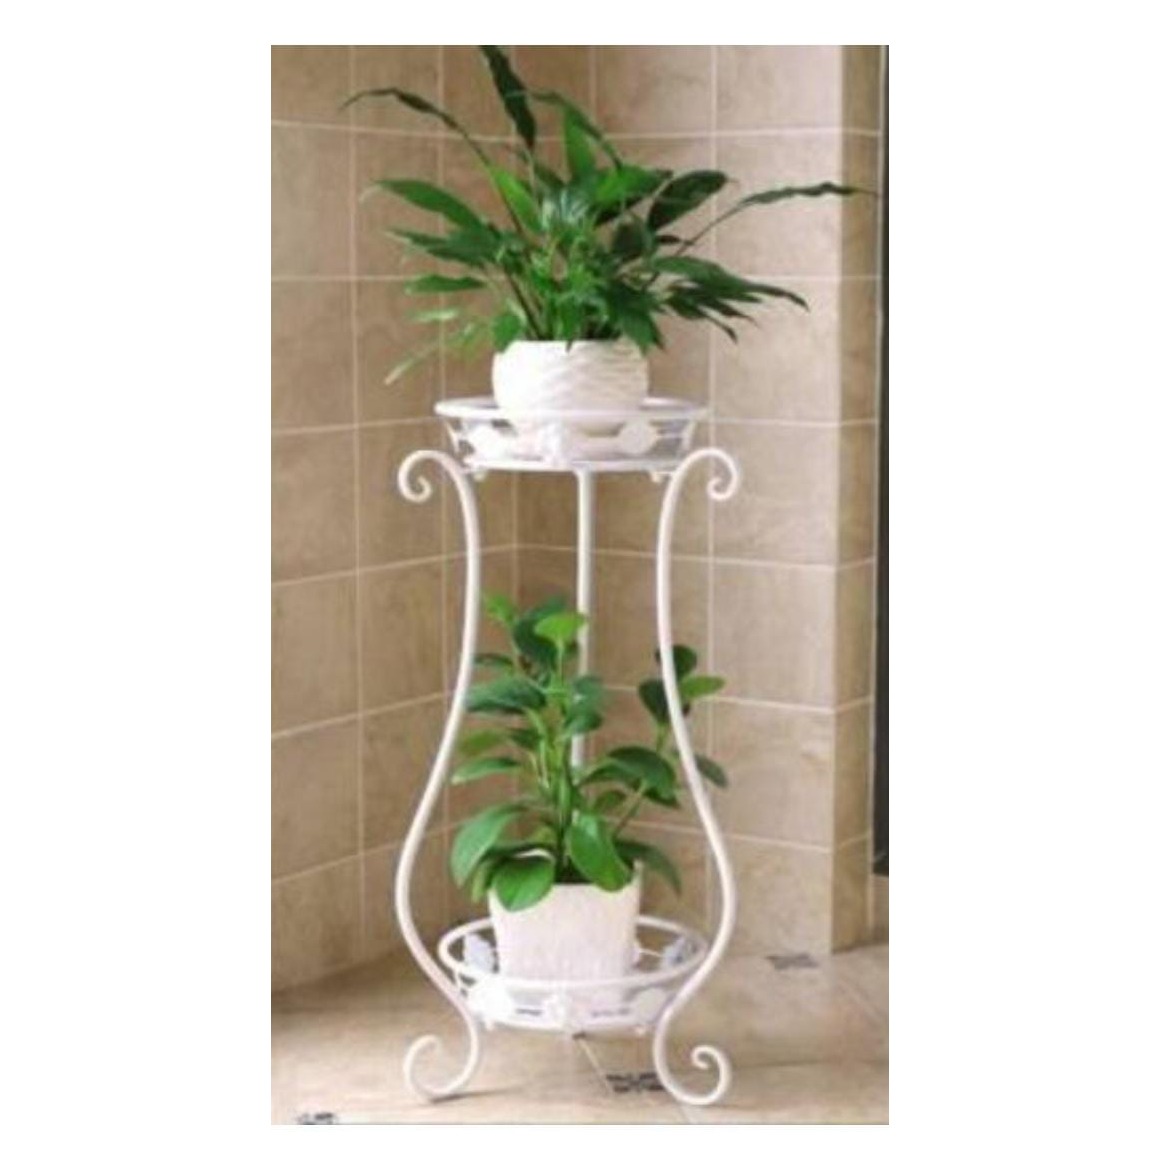 Buy planters and plants at low cost at apkainterior.comHome and LifestyleHome Decor - FurnishingsAll Indiaother